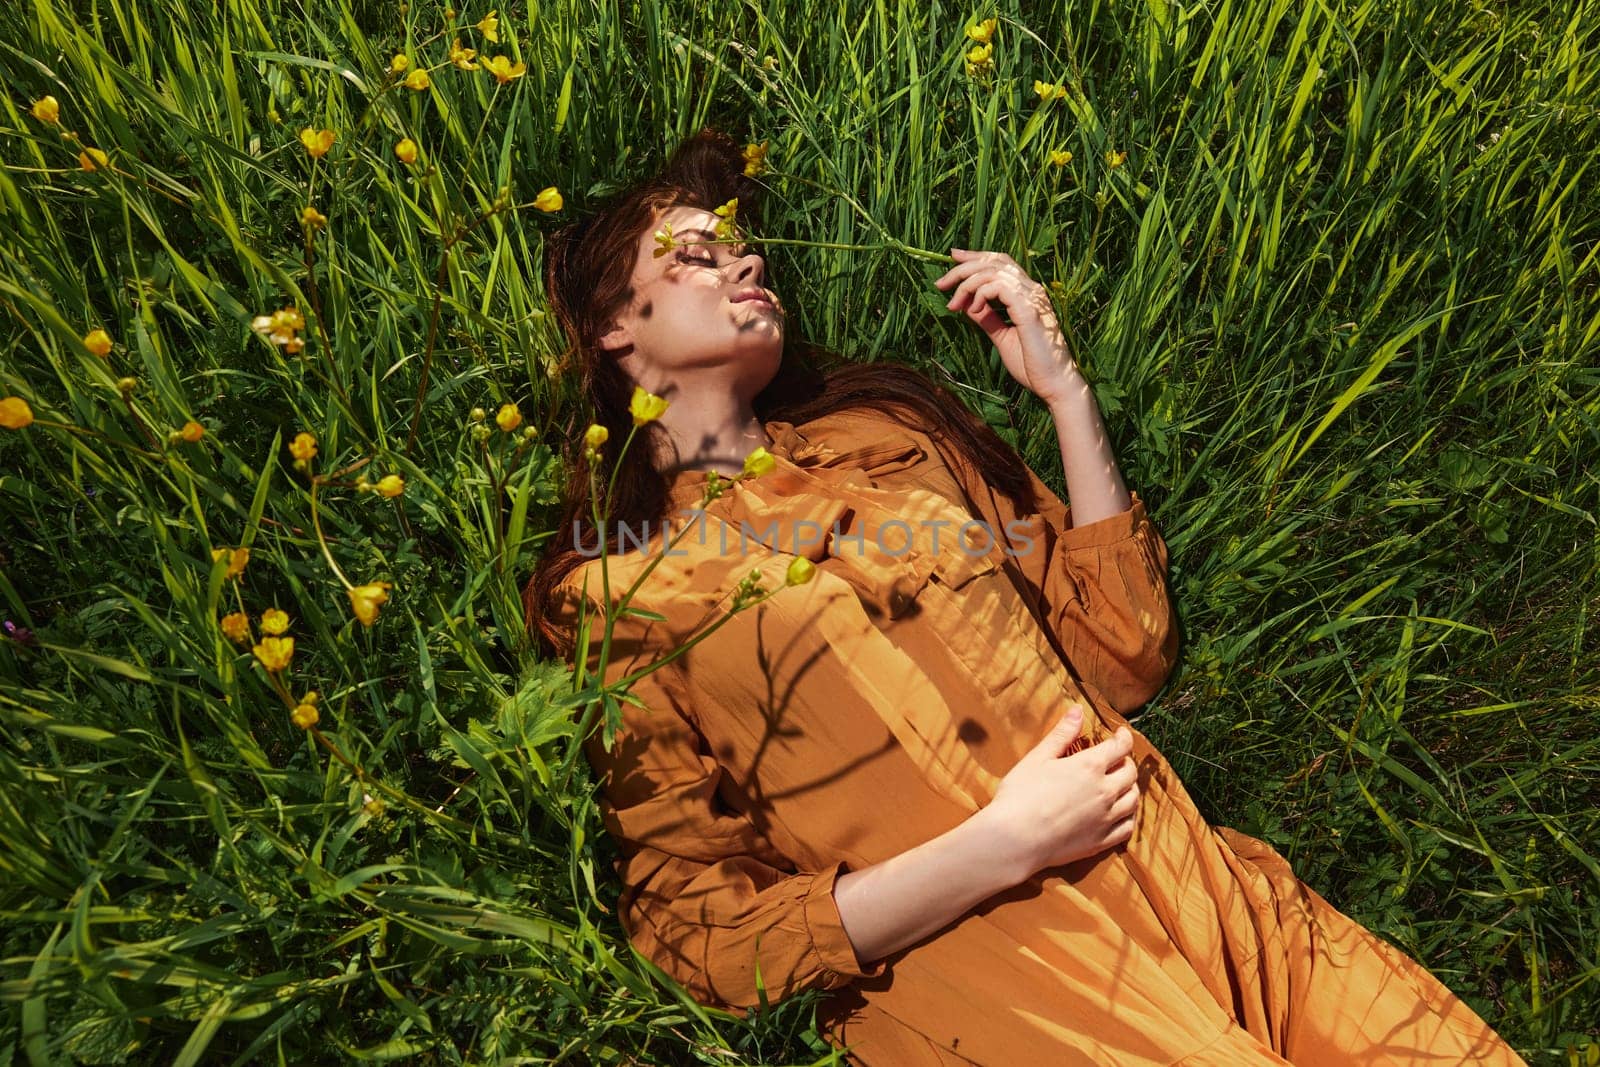 a calm woman with long red hair lies in a green field with yellow flowers, in an orange dress with her eyes closed, with a pleasant smile on her face, enjoying peace and recuperating. High quality photo